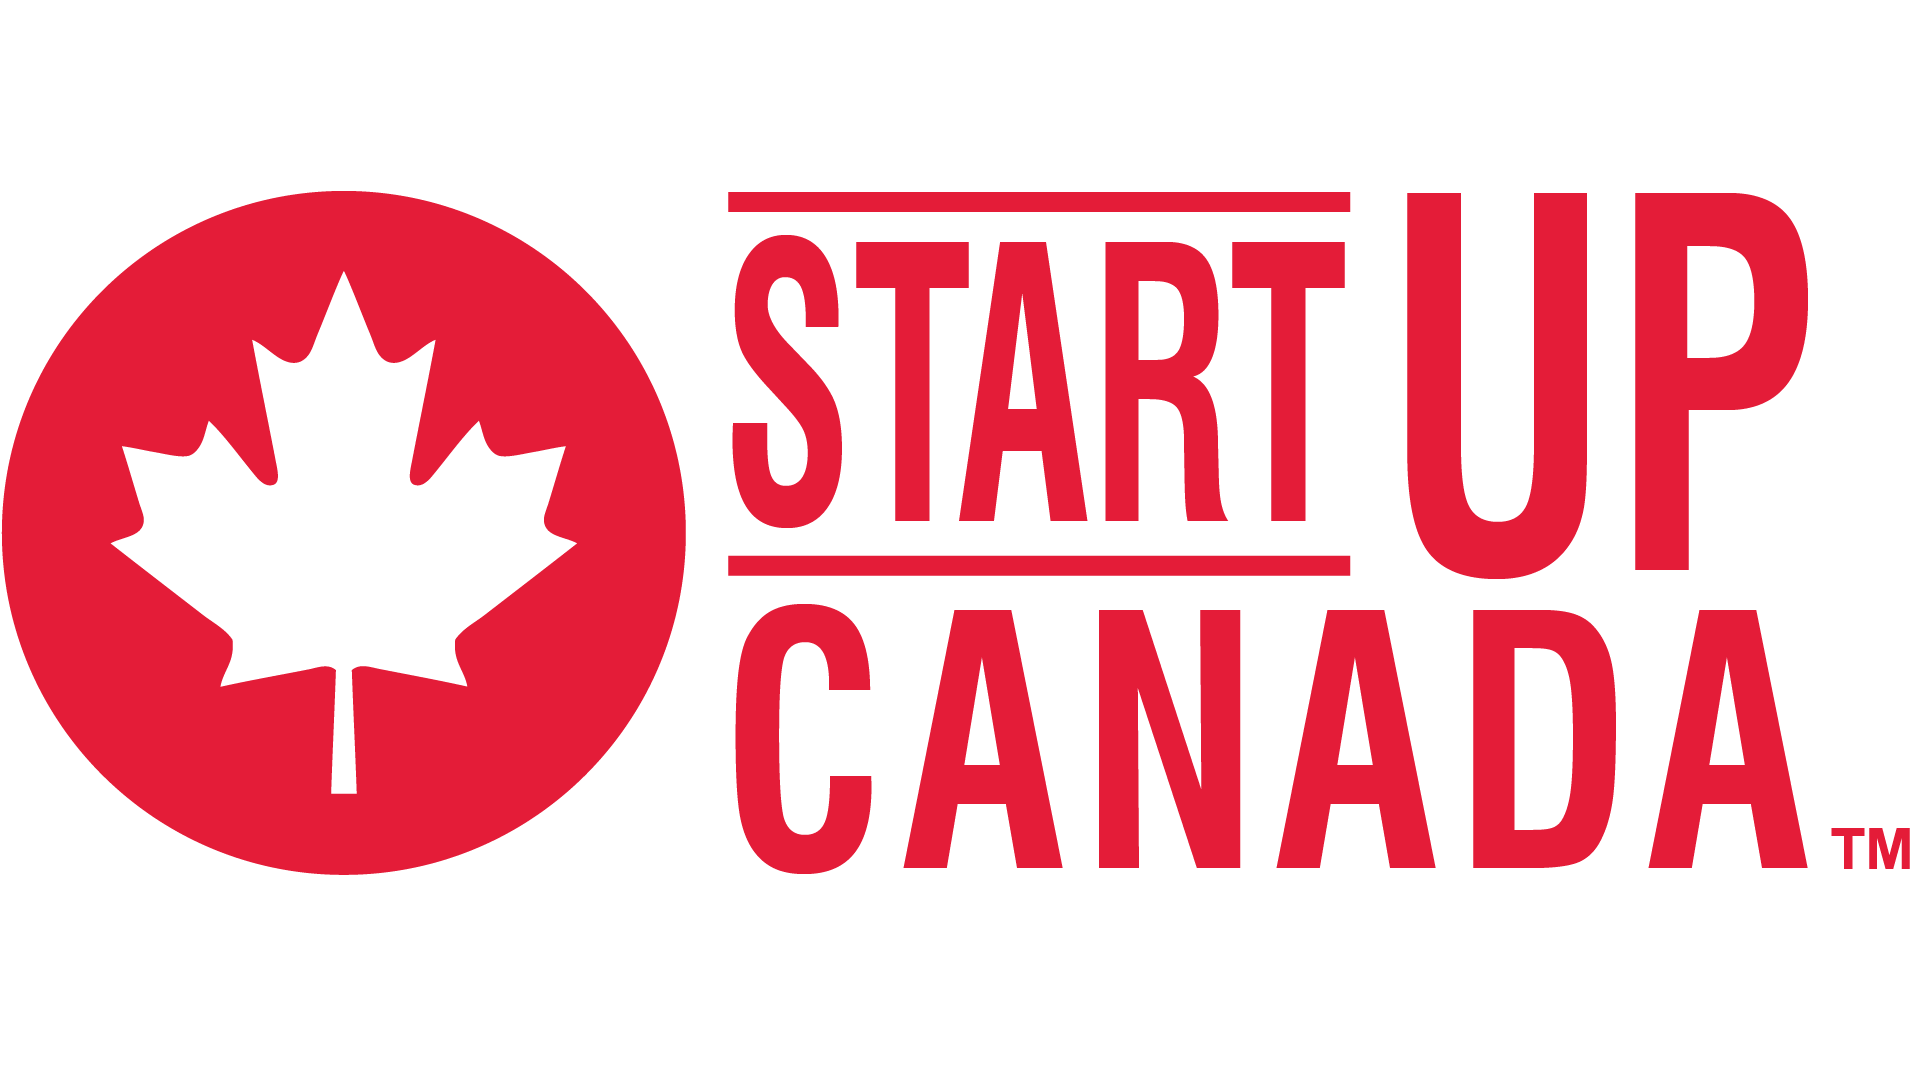 Startup-Canada-English-Red-Logo-red-E21836-1920x1080.png